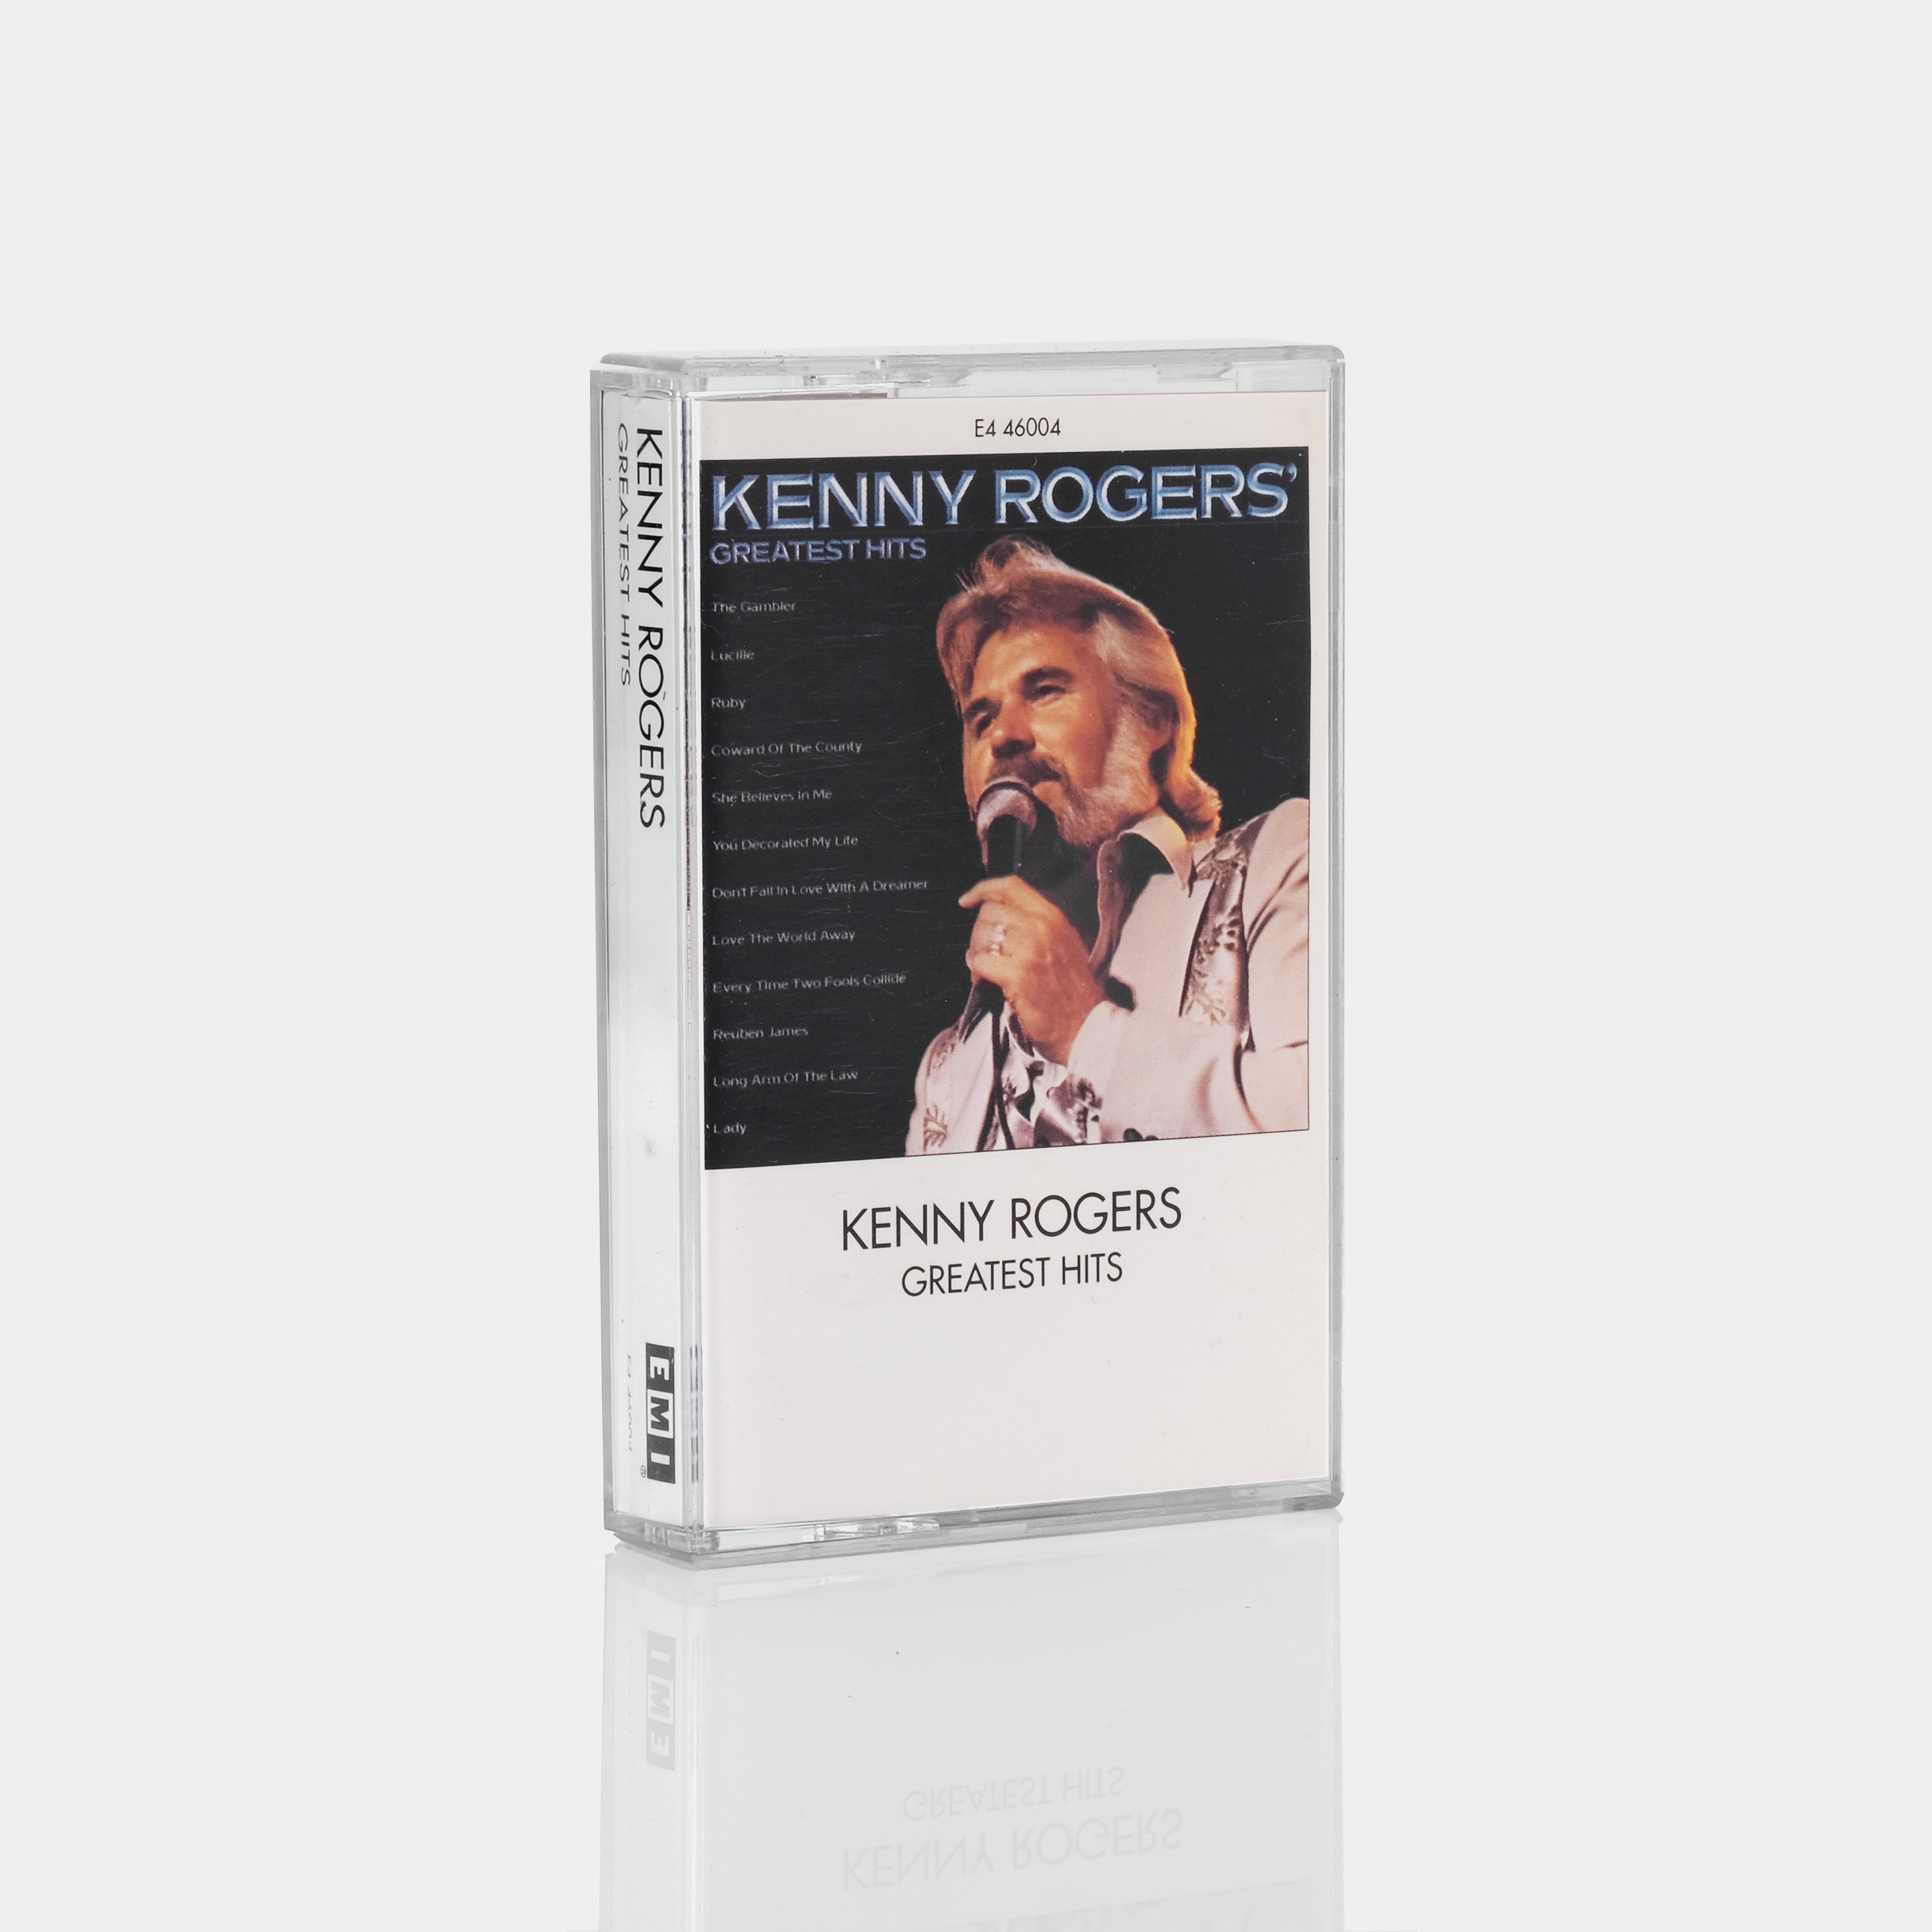 Kenny Rogers - Greatest Hits Cassette Tape